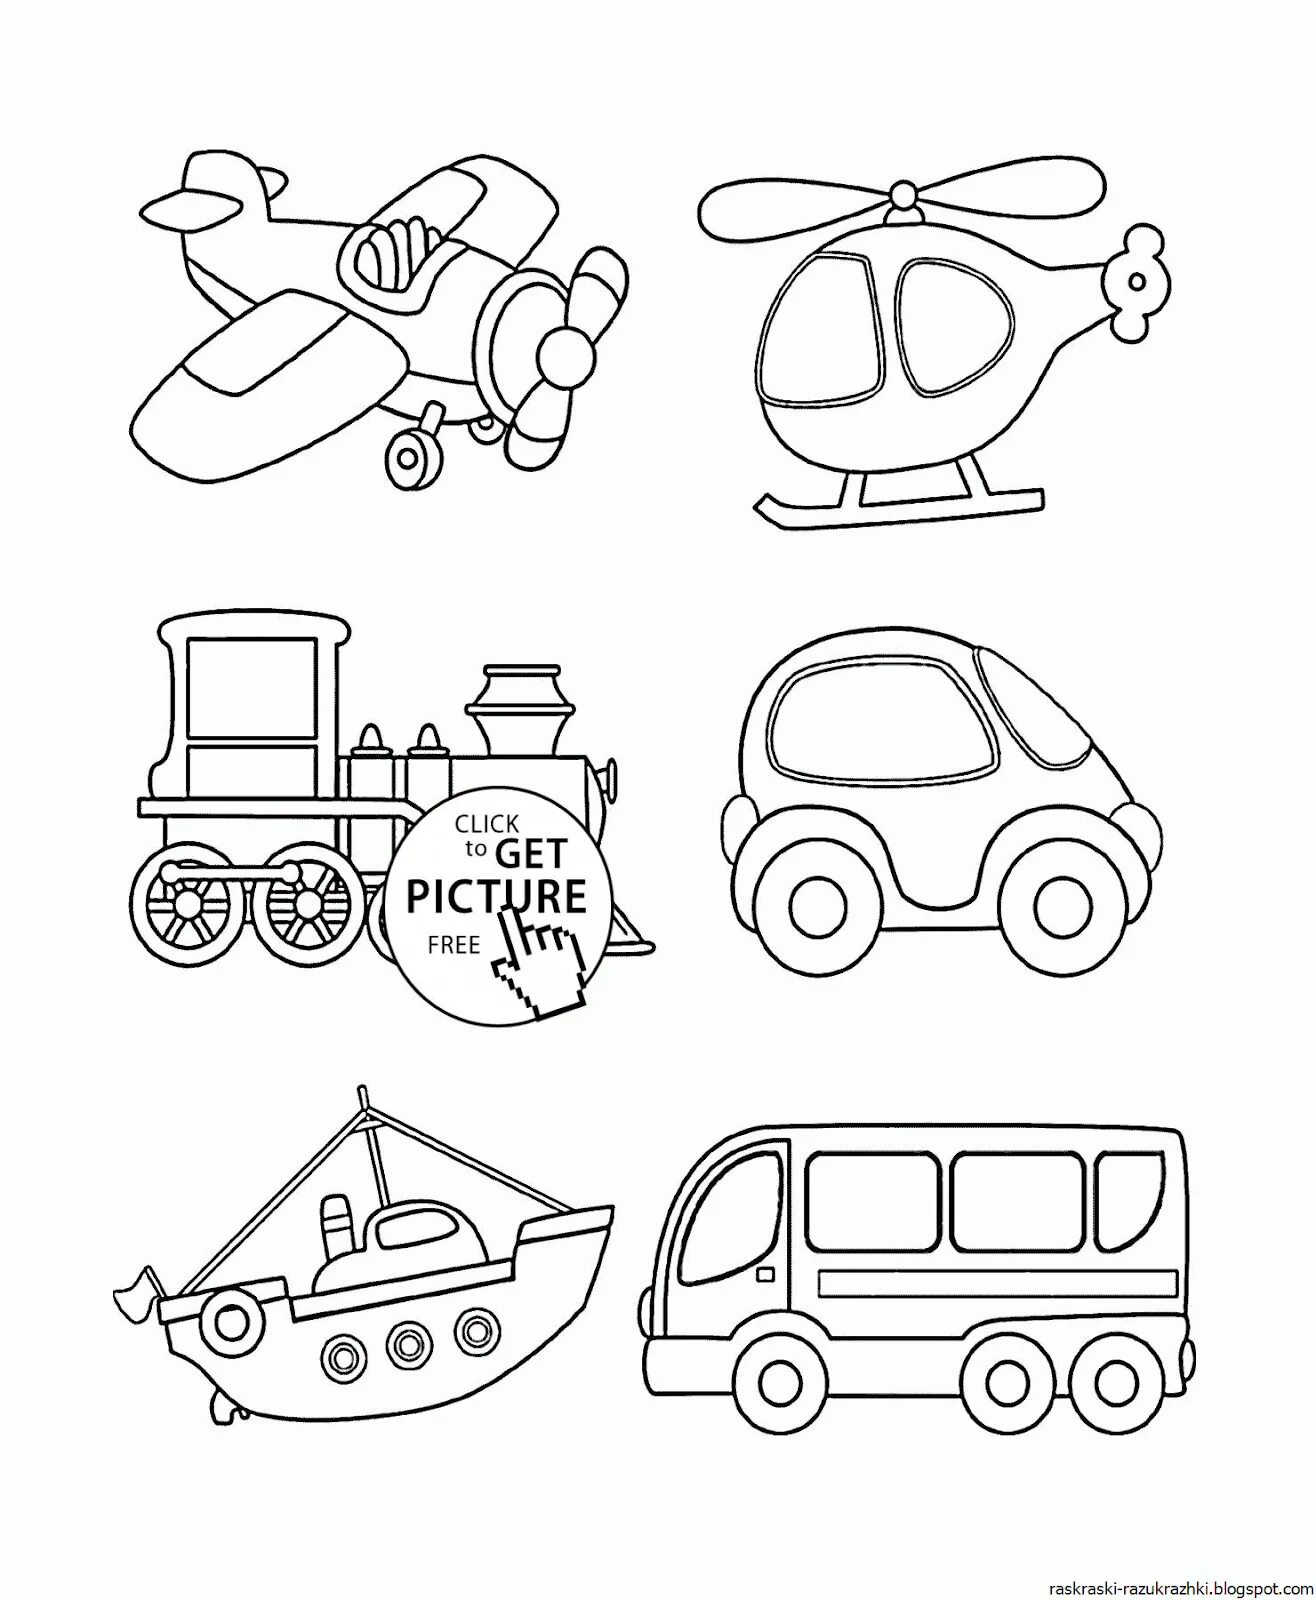 Glowing ground vehicle coloring page